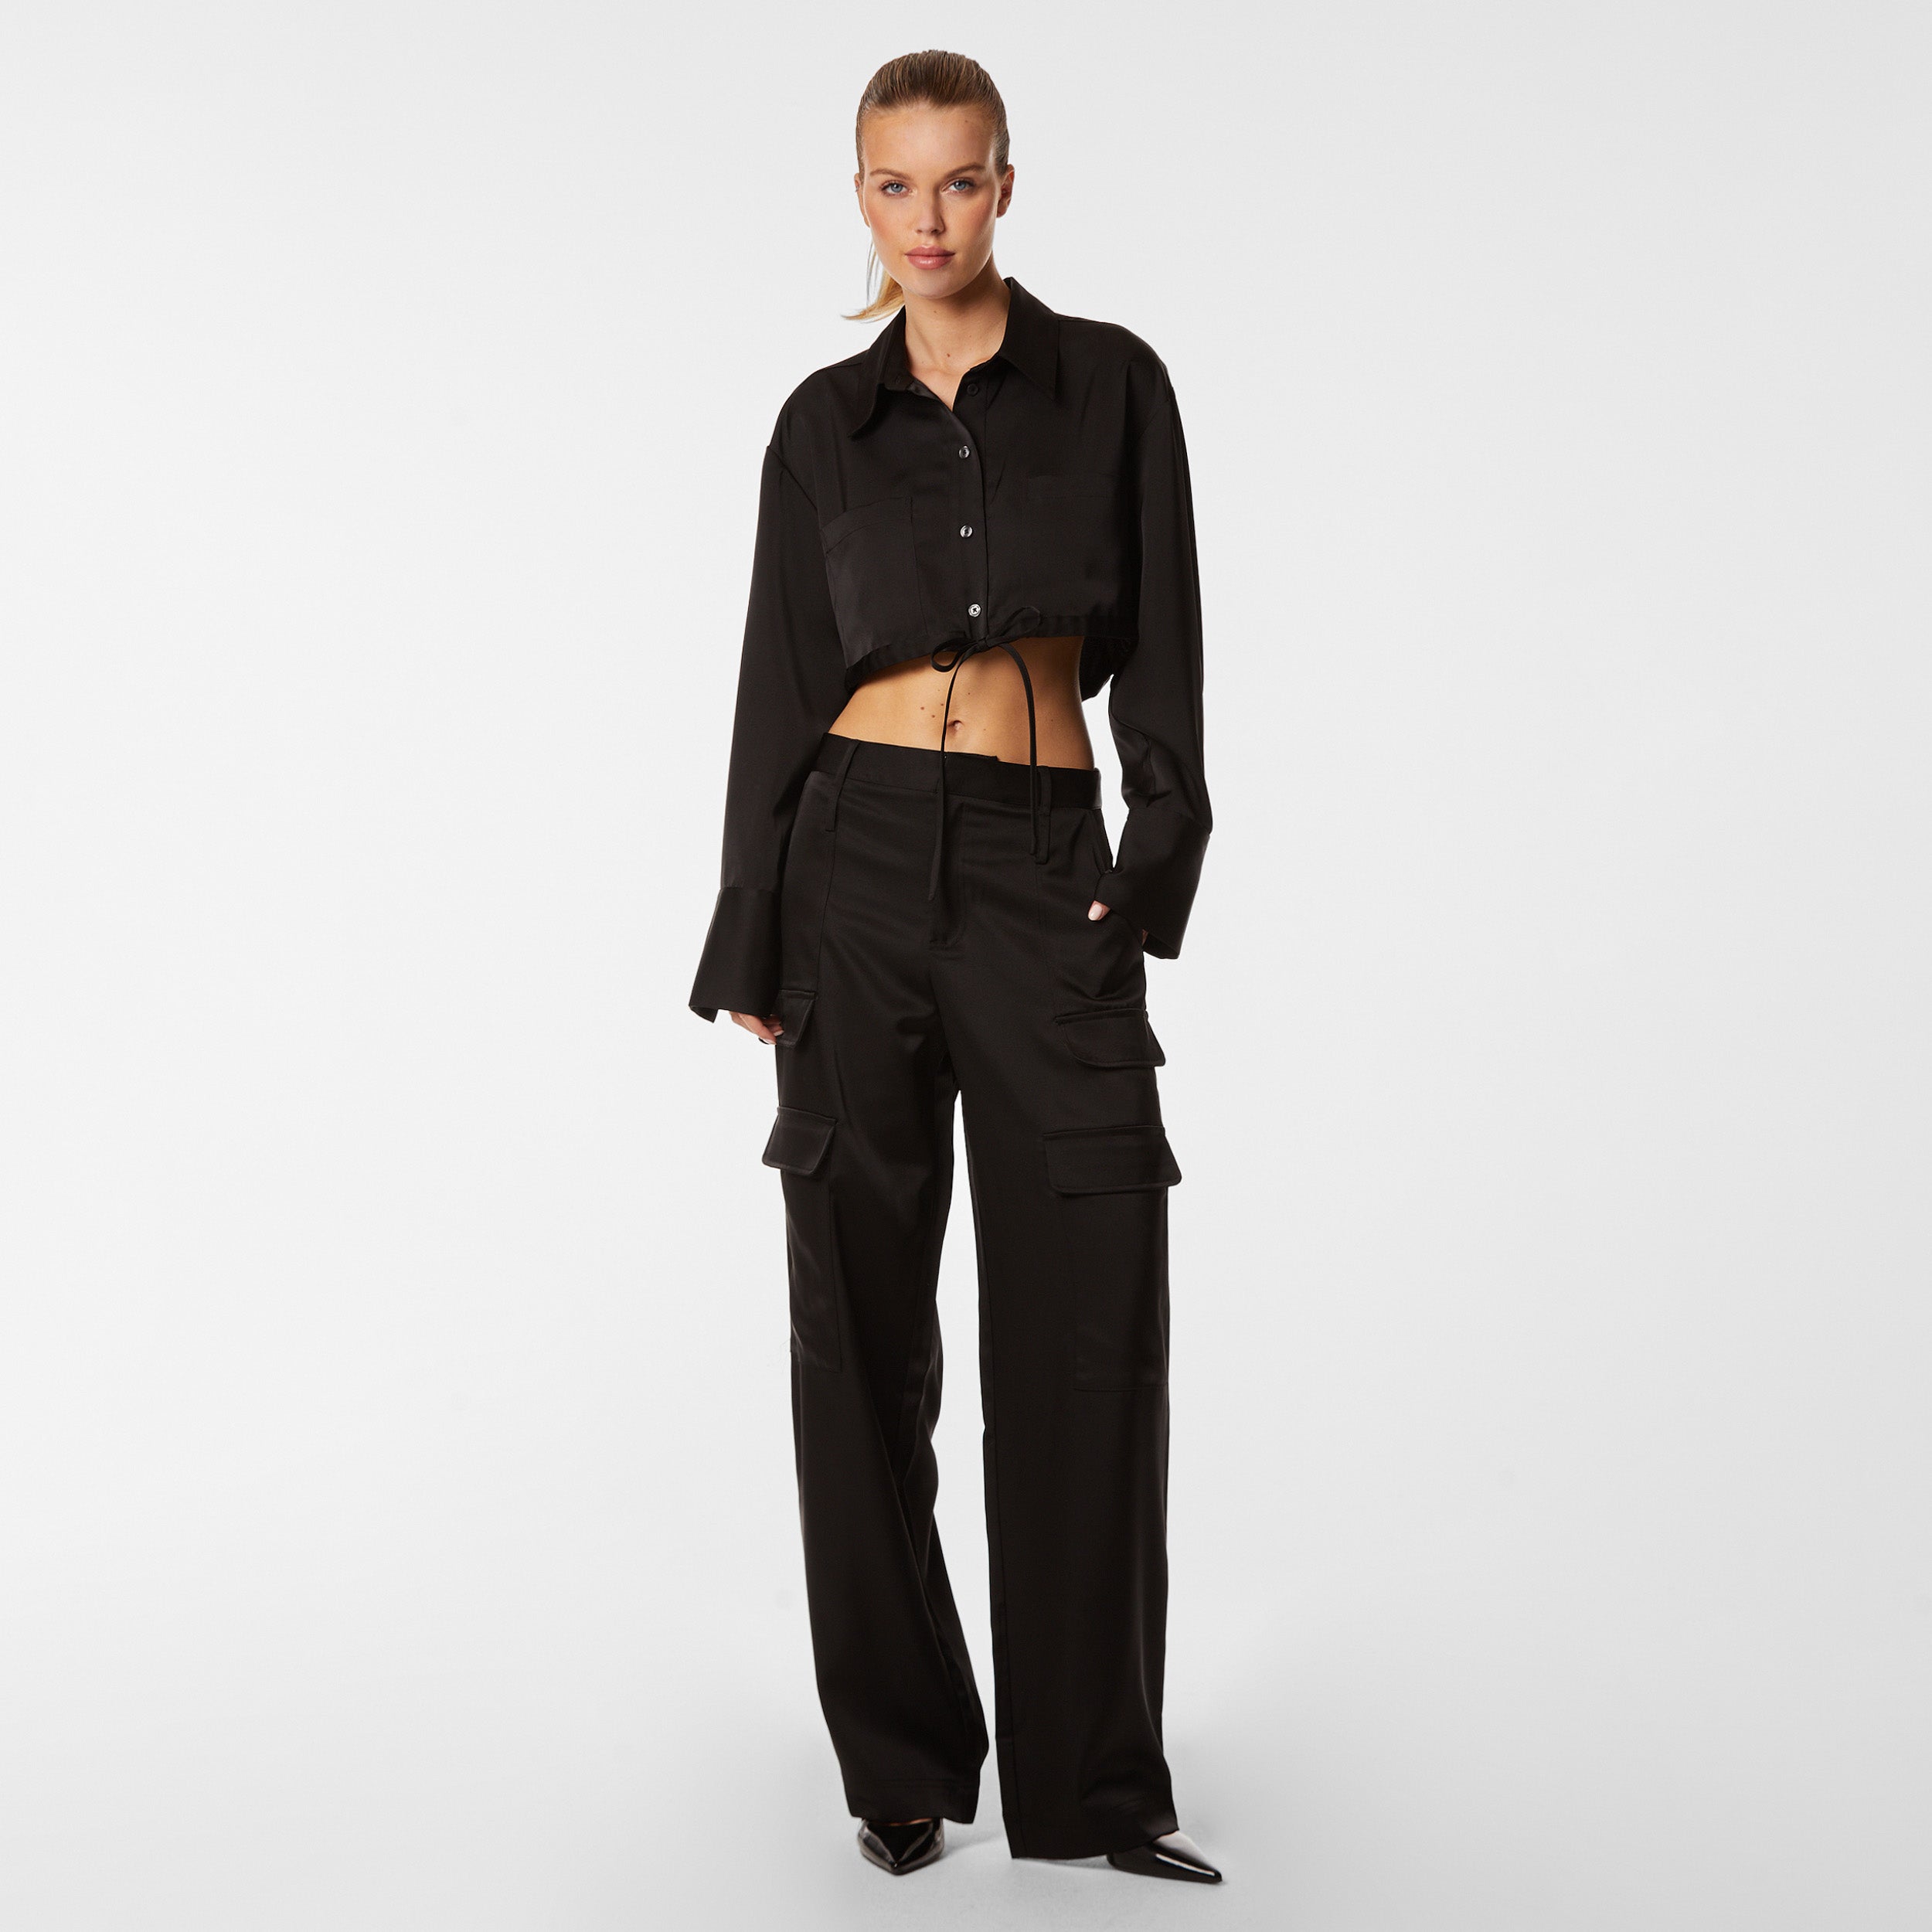 Full view of woman wearing Black Satin Milan Pant features Mid-rise with side pockets and cargo detail. Luxurious and structured satin-like fabric. 